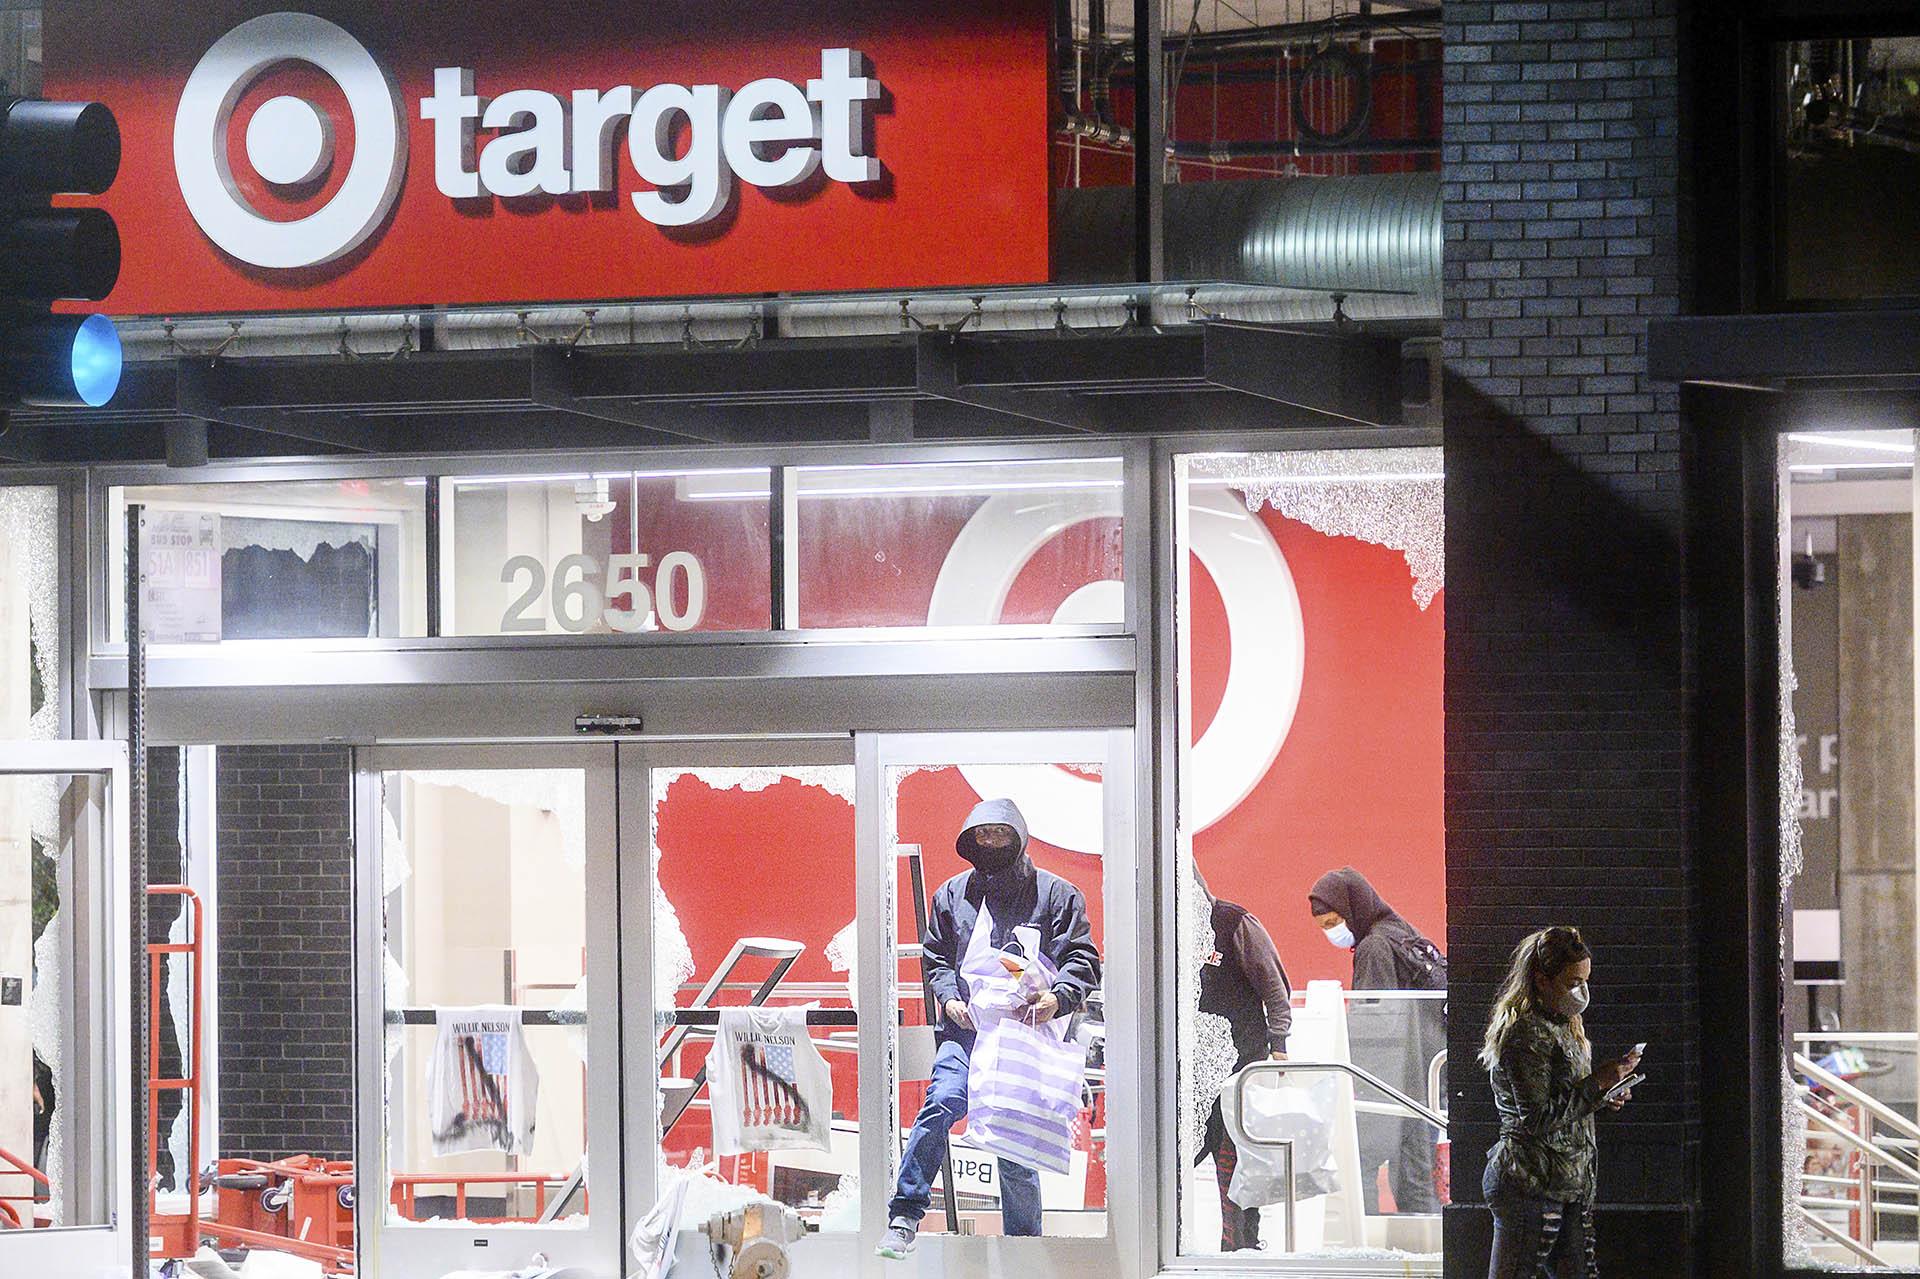 People leave a vandalized Target store in Oakland, Calif., on Saturday, May 30, 2020, during protests against the death of George Floyd, a handcuffed black man in police custody in Minneapolis. (AP Photo / Noah Berger)